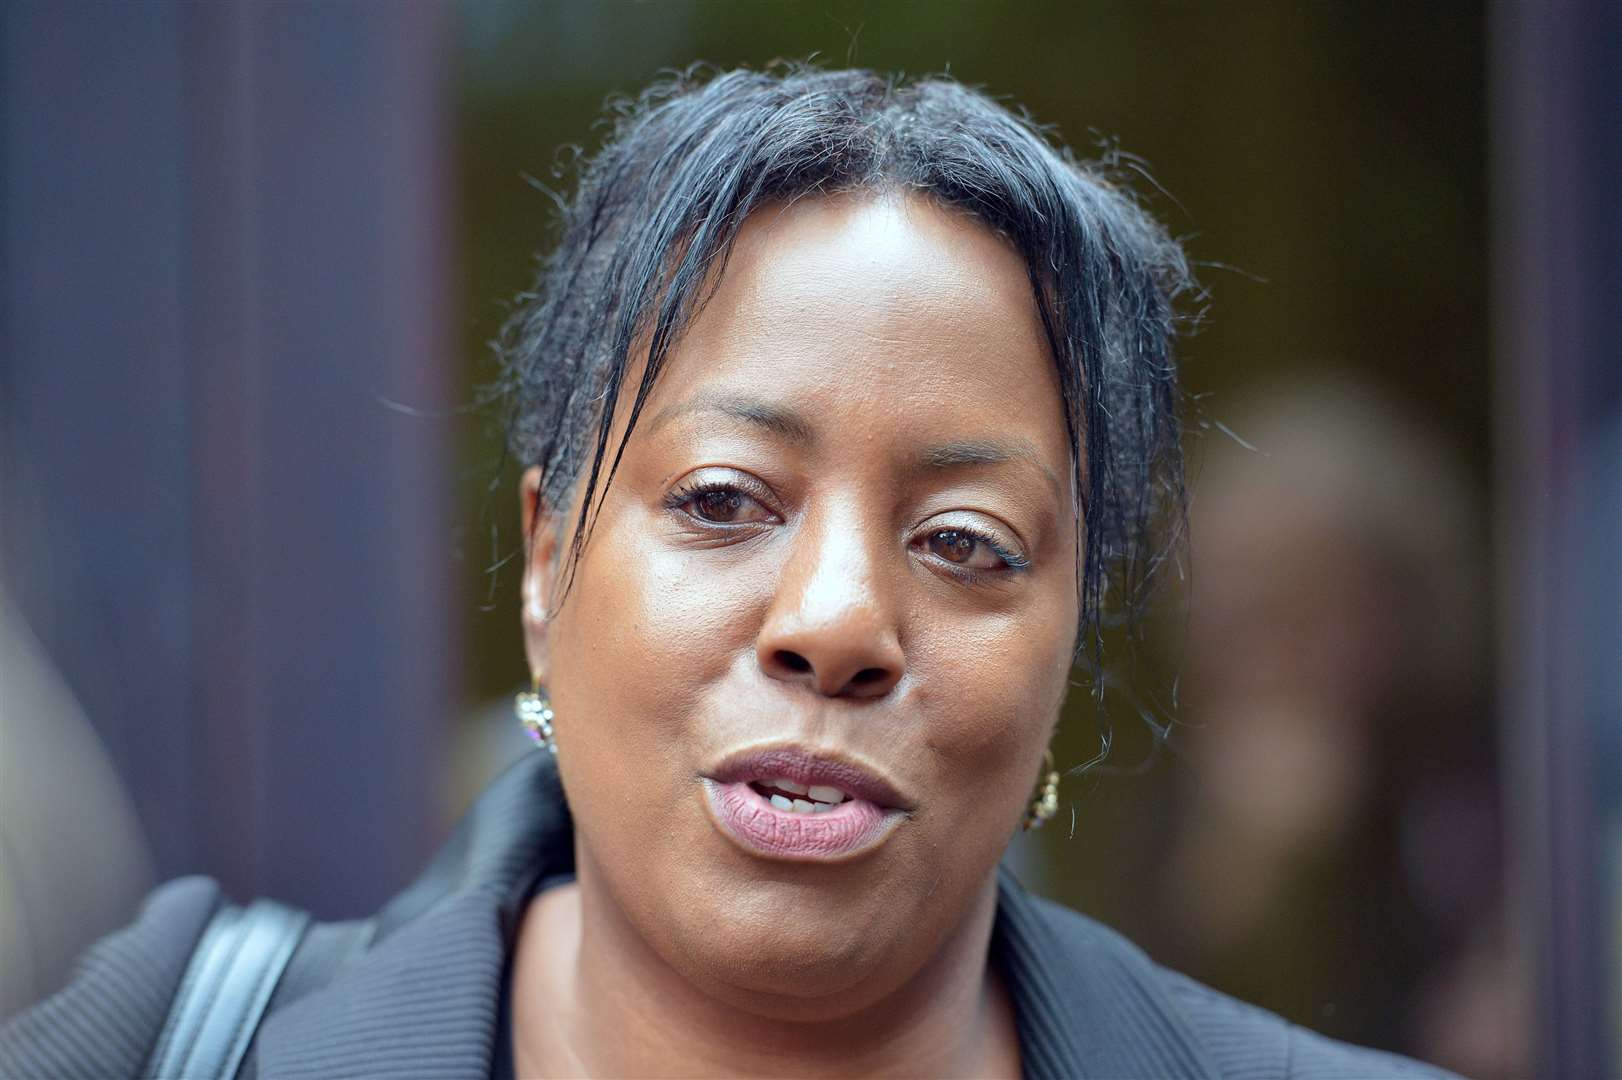 Lawyer Jacqueline McKenzie said she believes there has been ‘a mixture of inefficiency, lack of prioritisation and institutional racism’ with the compensation scheme (Nick Ansell/PA)